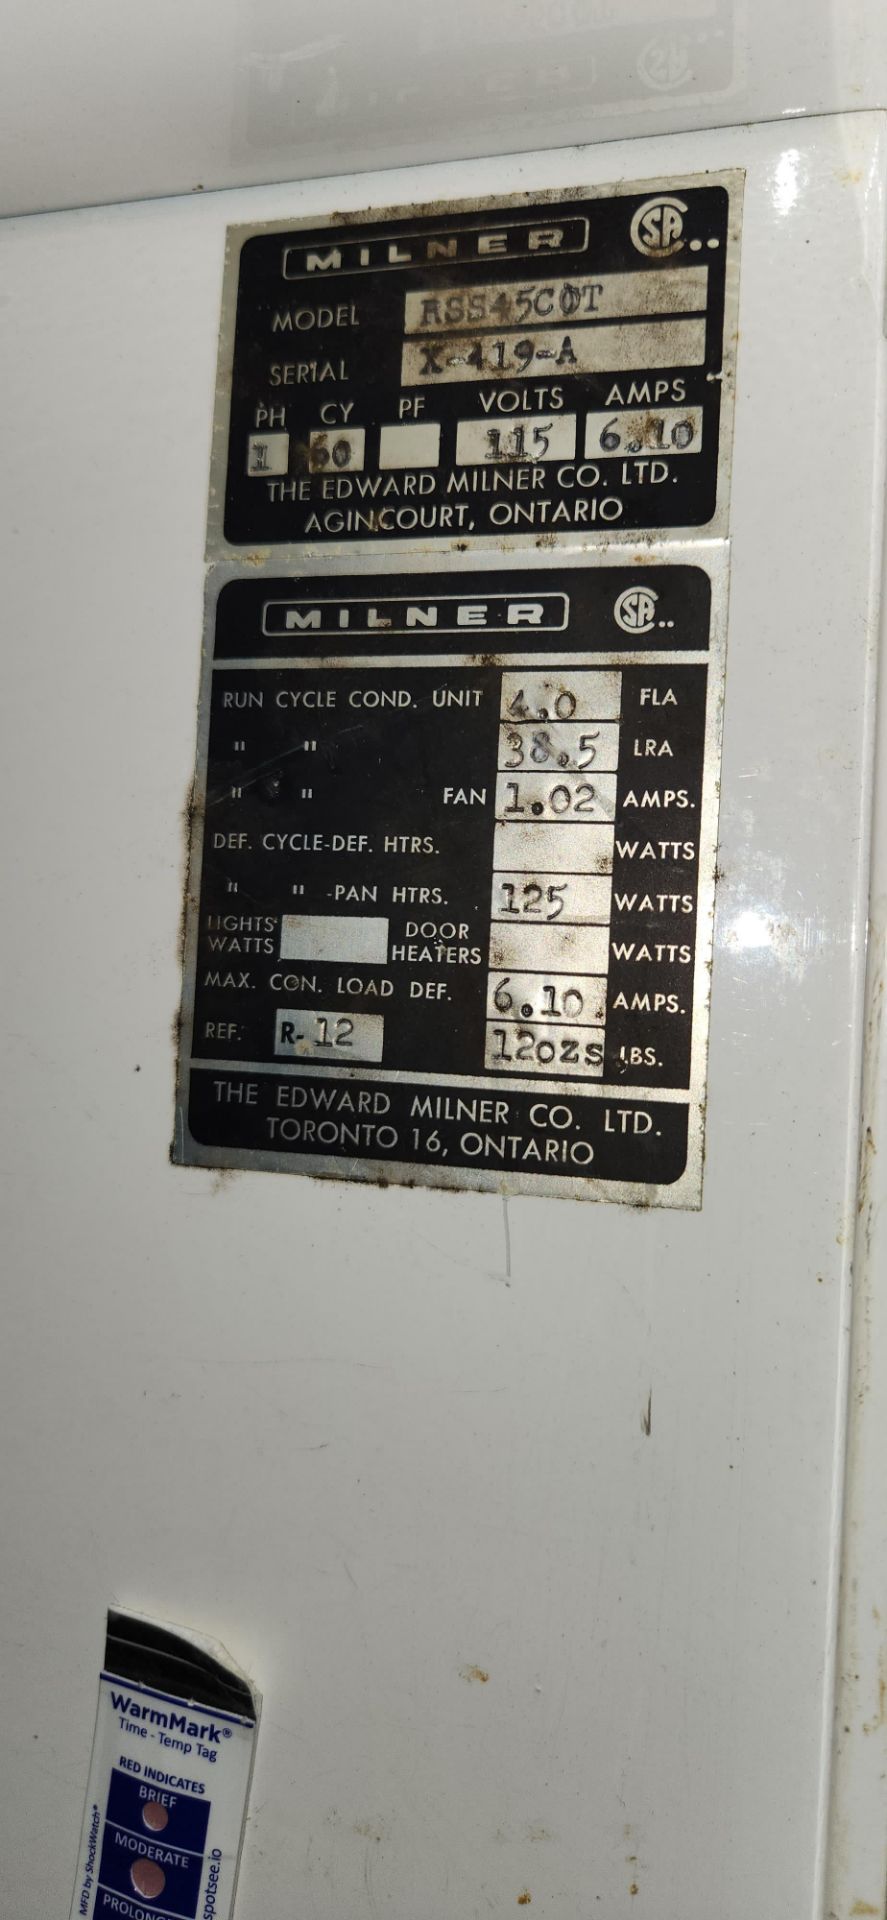 MILNER RSS45COT FRIDGE, APPROX. 54"W X 6'H X 30"D - Image 3 of 4